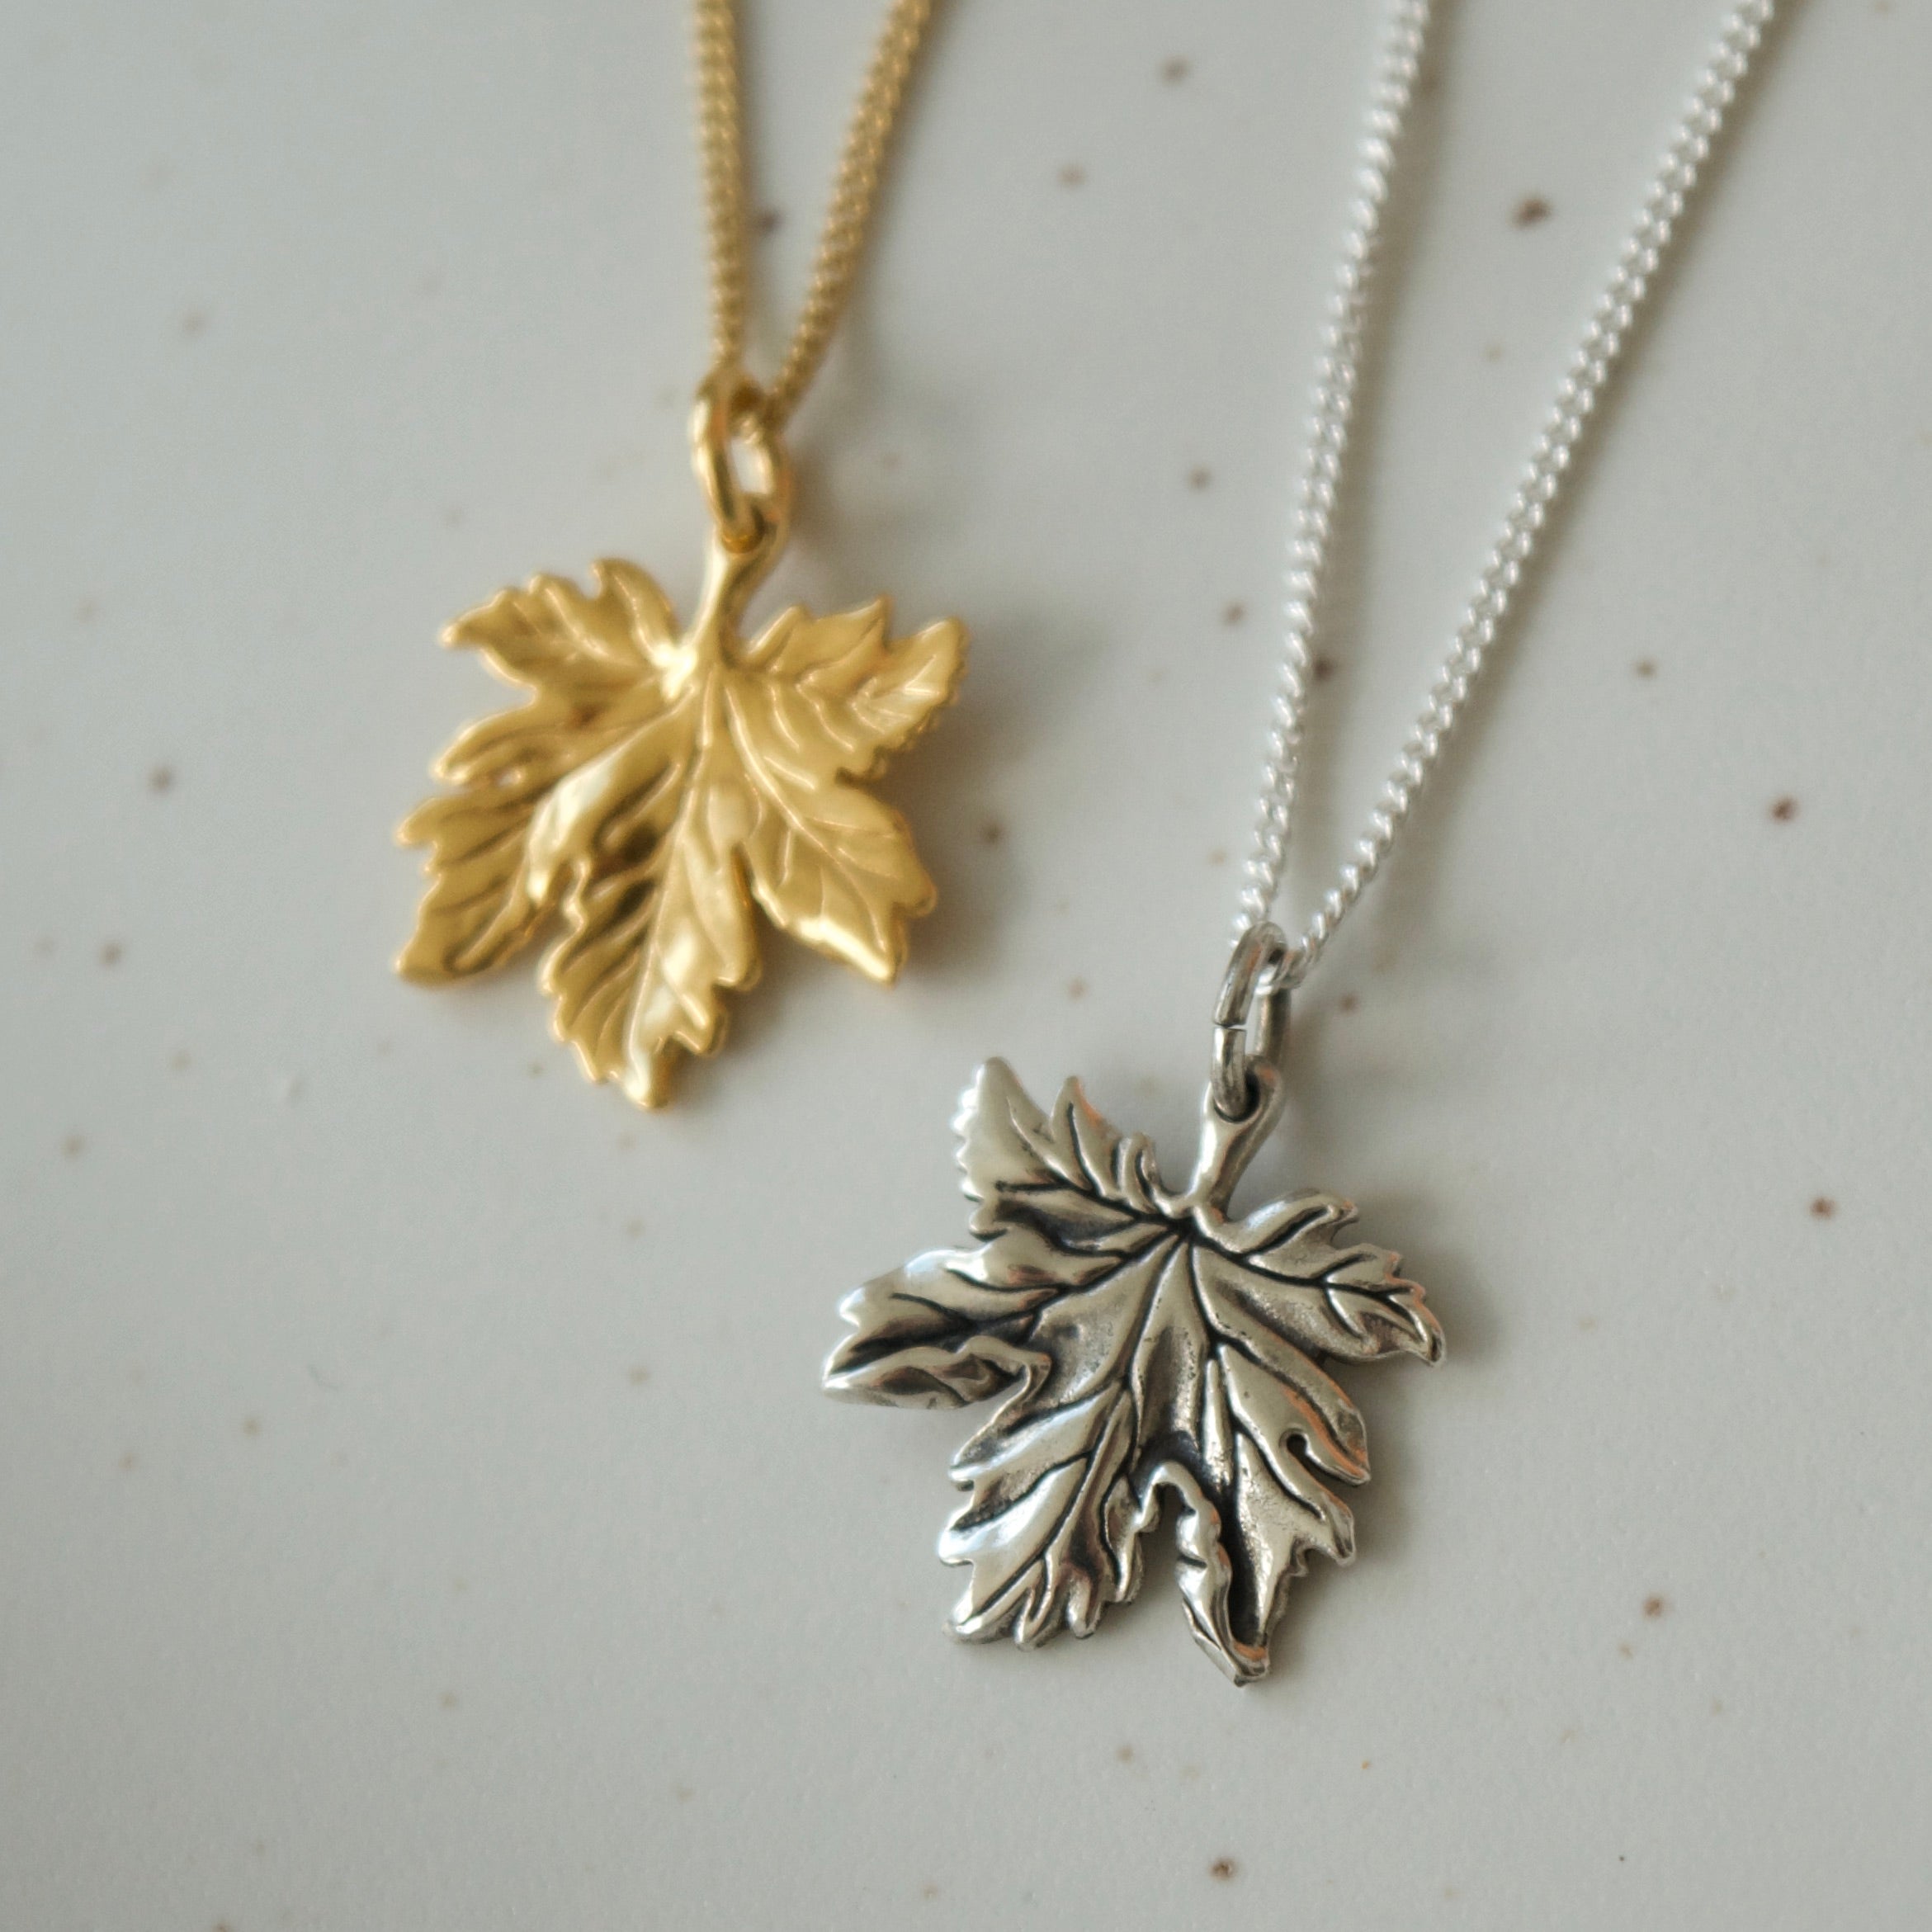 Tiny Canadian Maple Leaf Necklace Silver